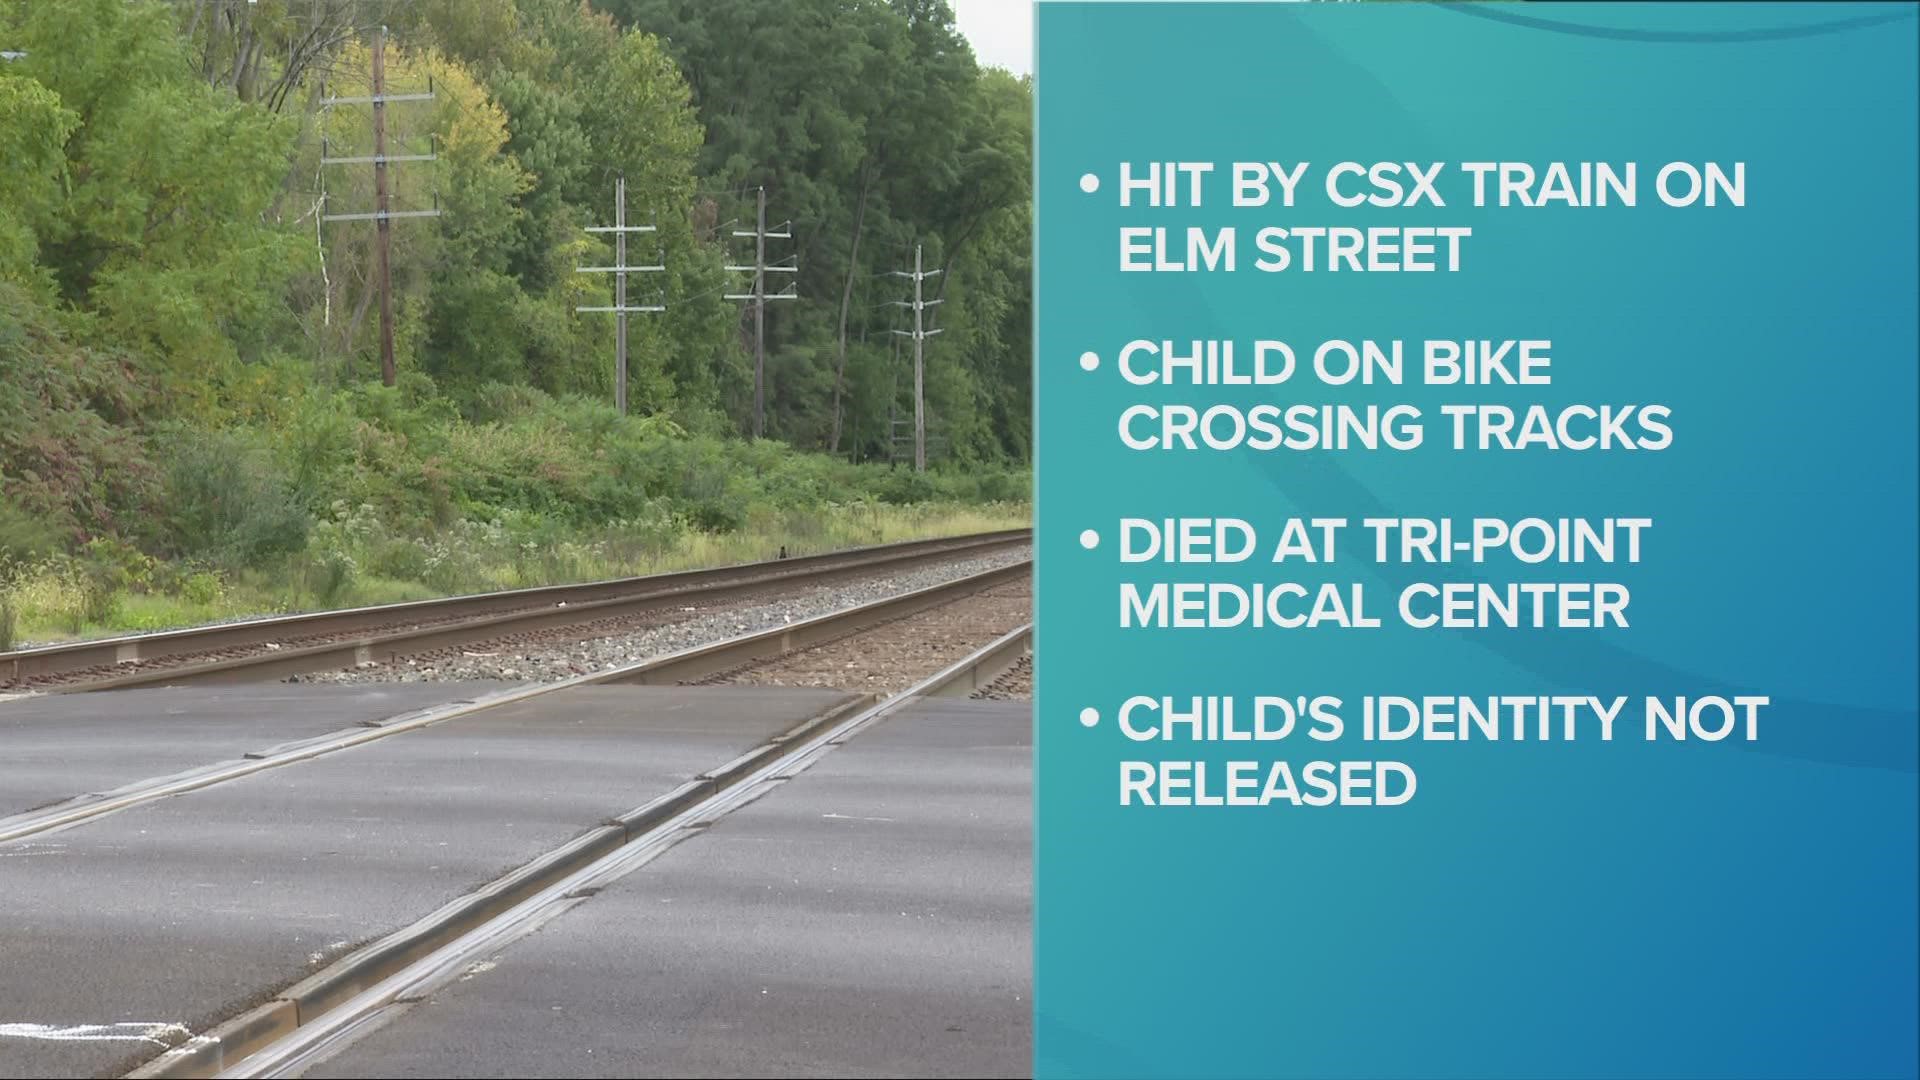 The identity of the victim is unknown. CSX says no crew members were reported injured.